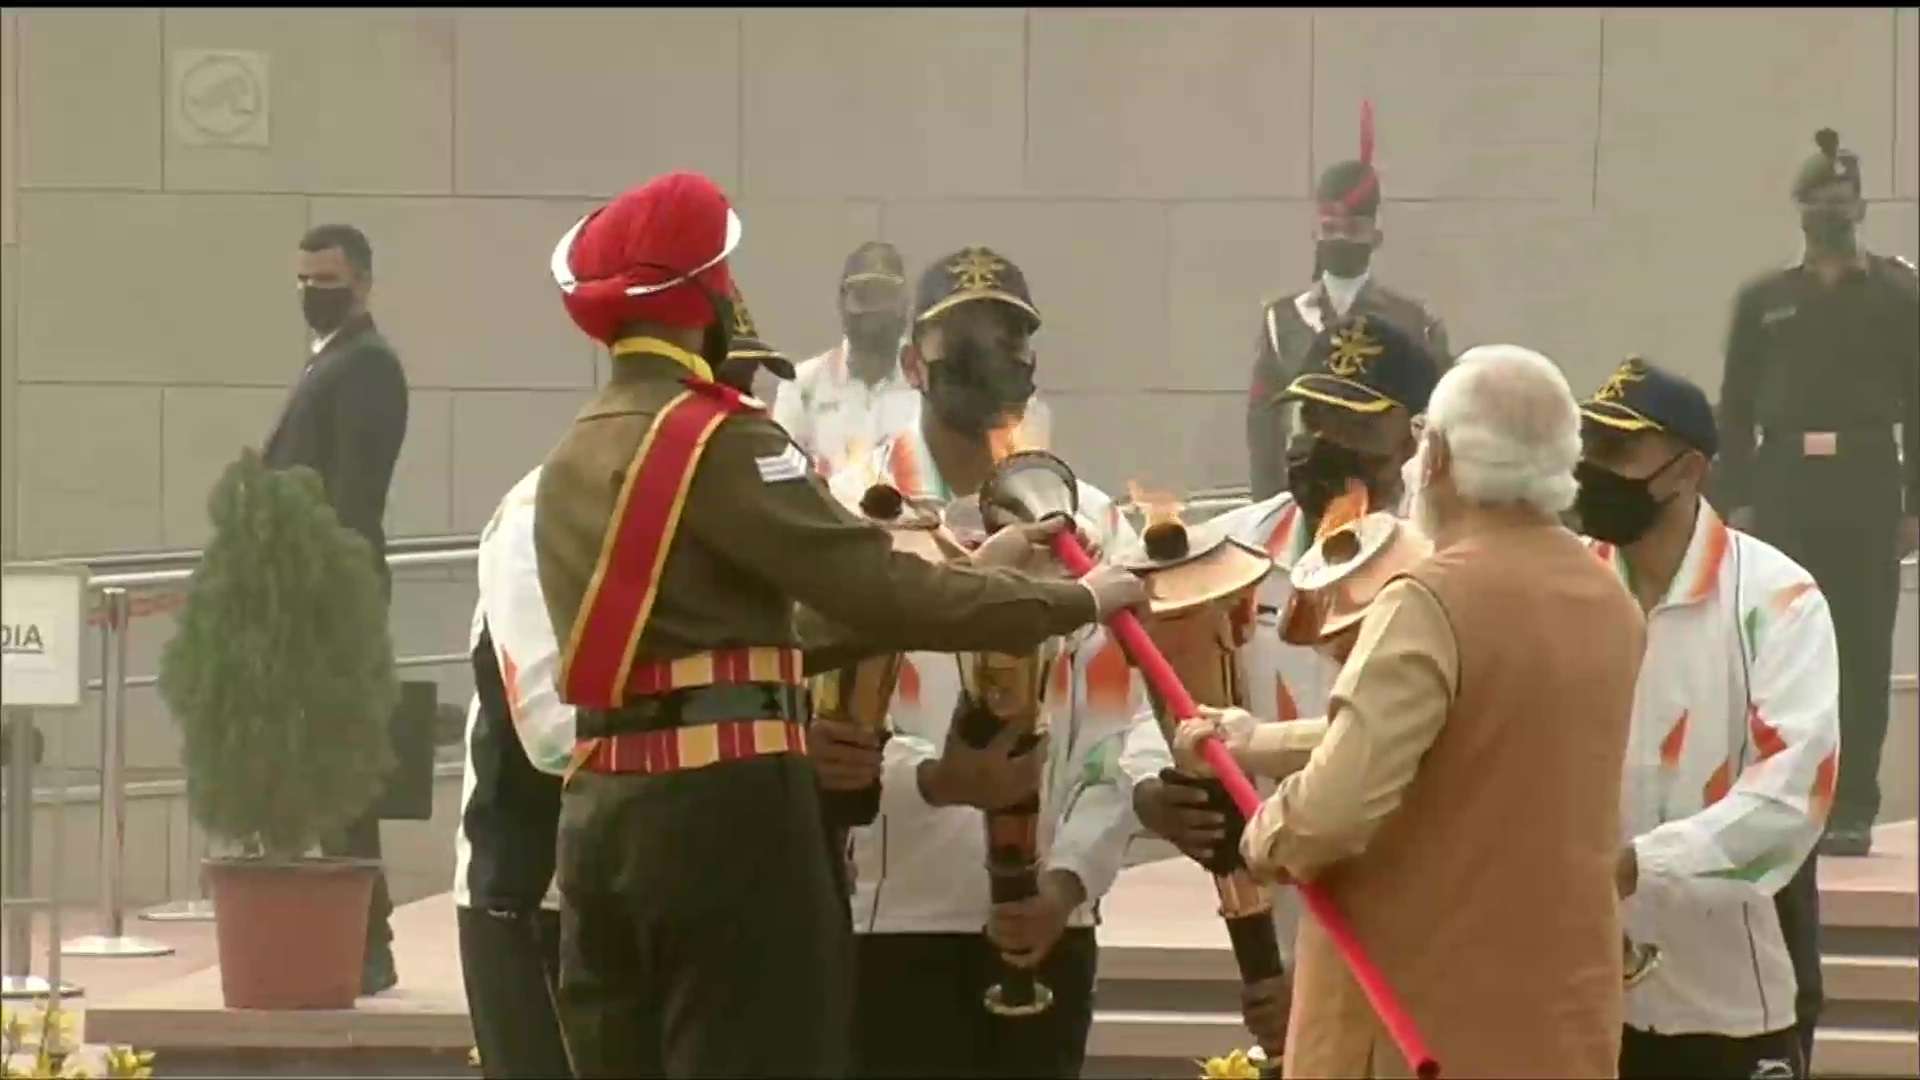 Pm Modi To Participate In The Reception Of Golden Victory Torches, Will Pay Tribute To The Martyrs